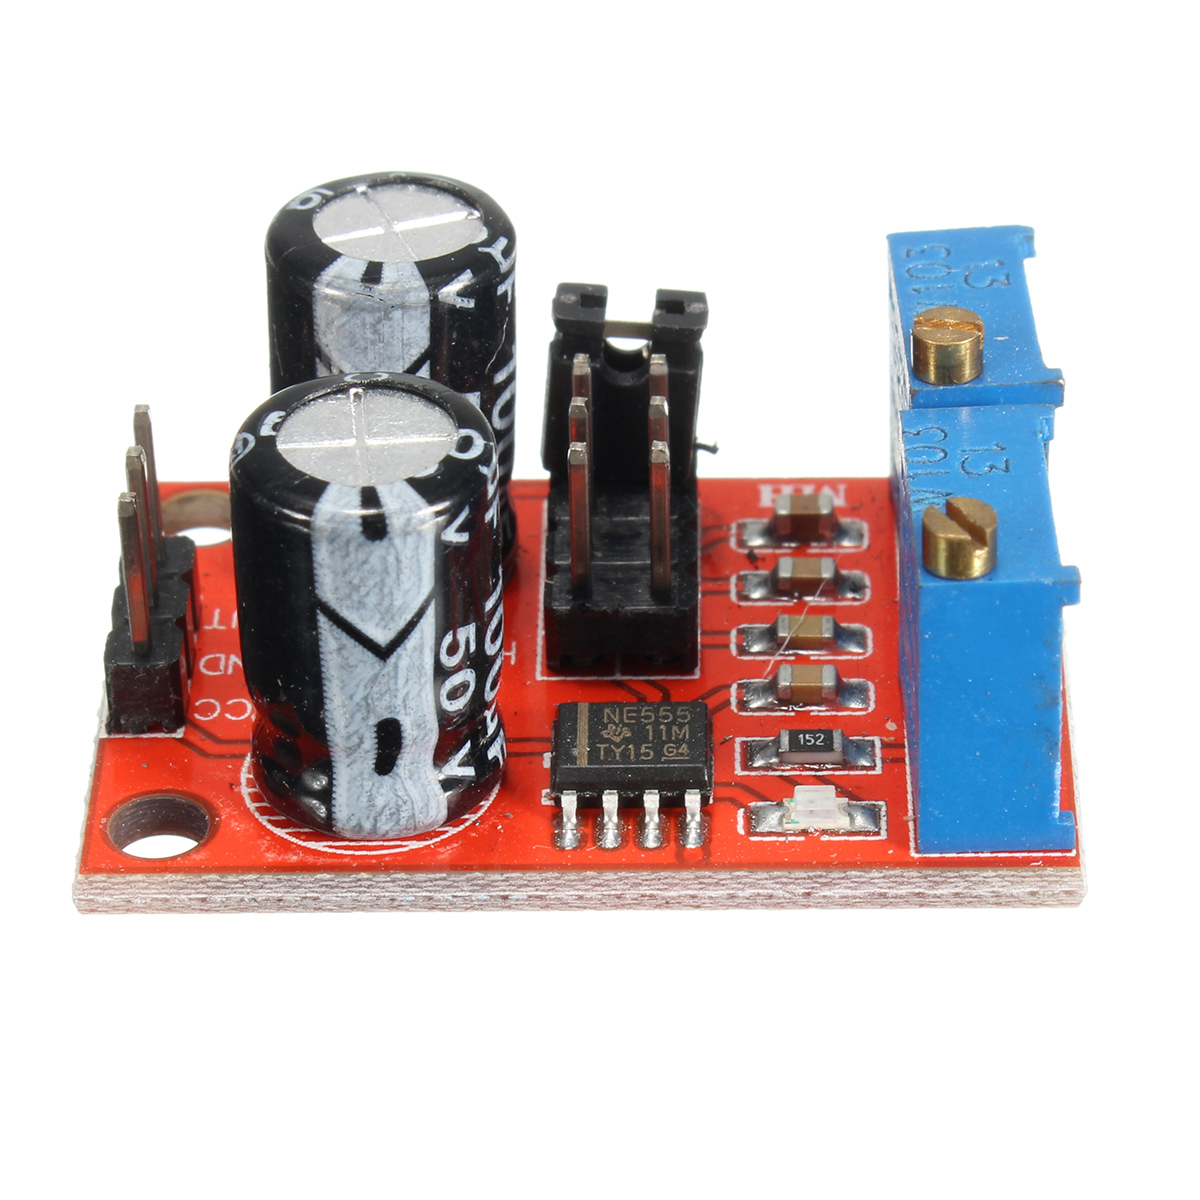 3pcs-NE555-Pulse-Frequency-Duty-Cycle-Adjustable-Module-Square-Wave-Signal-Generator-Stepper-Motor-D-1167072